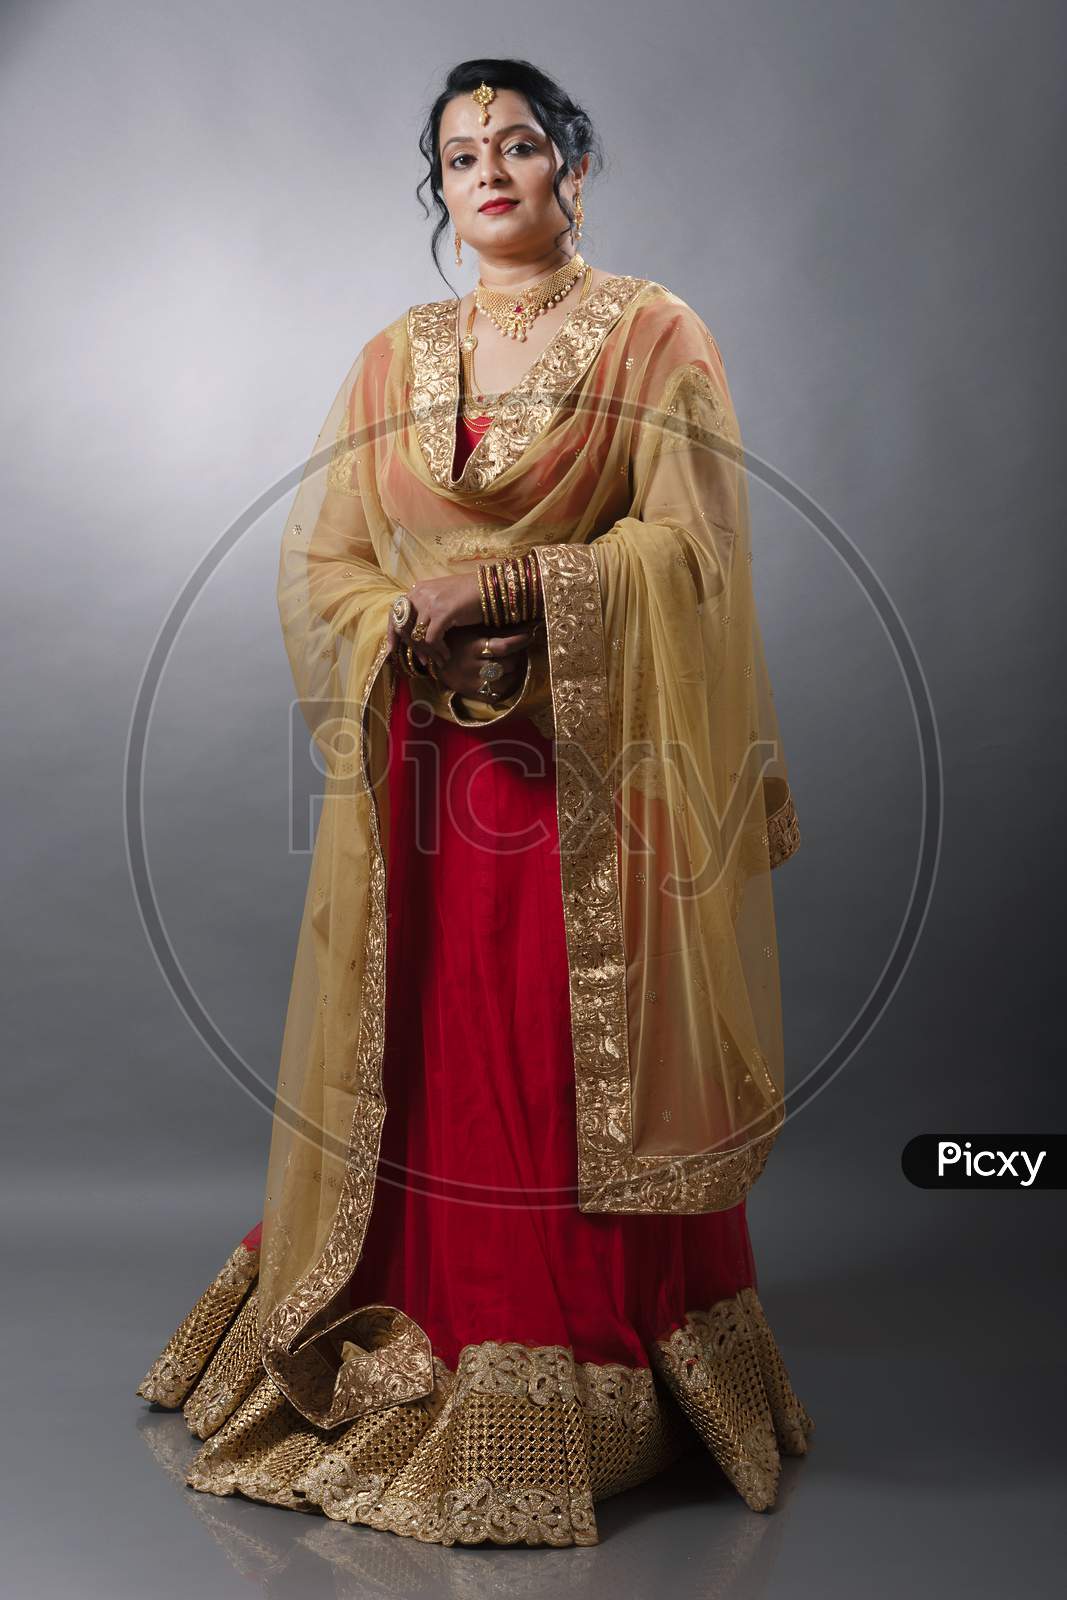 Middle aged Indian woman wearing traditional designer wear